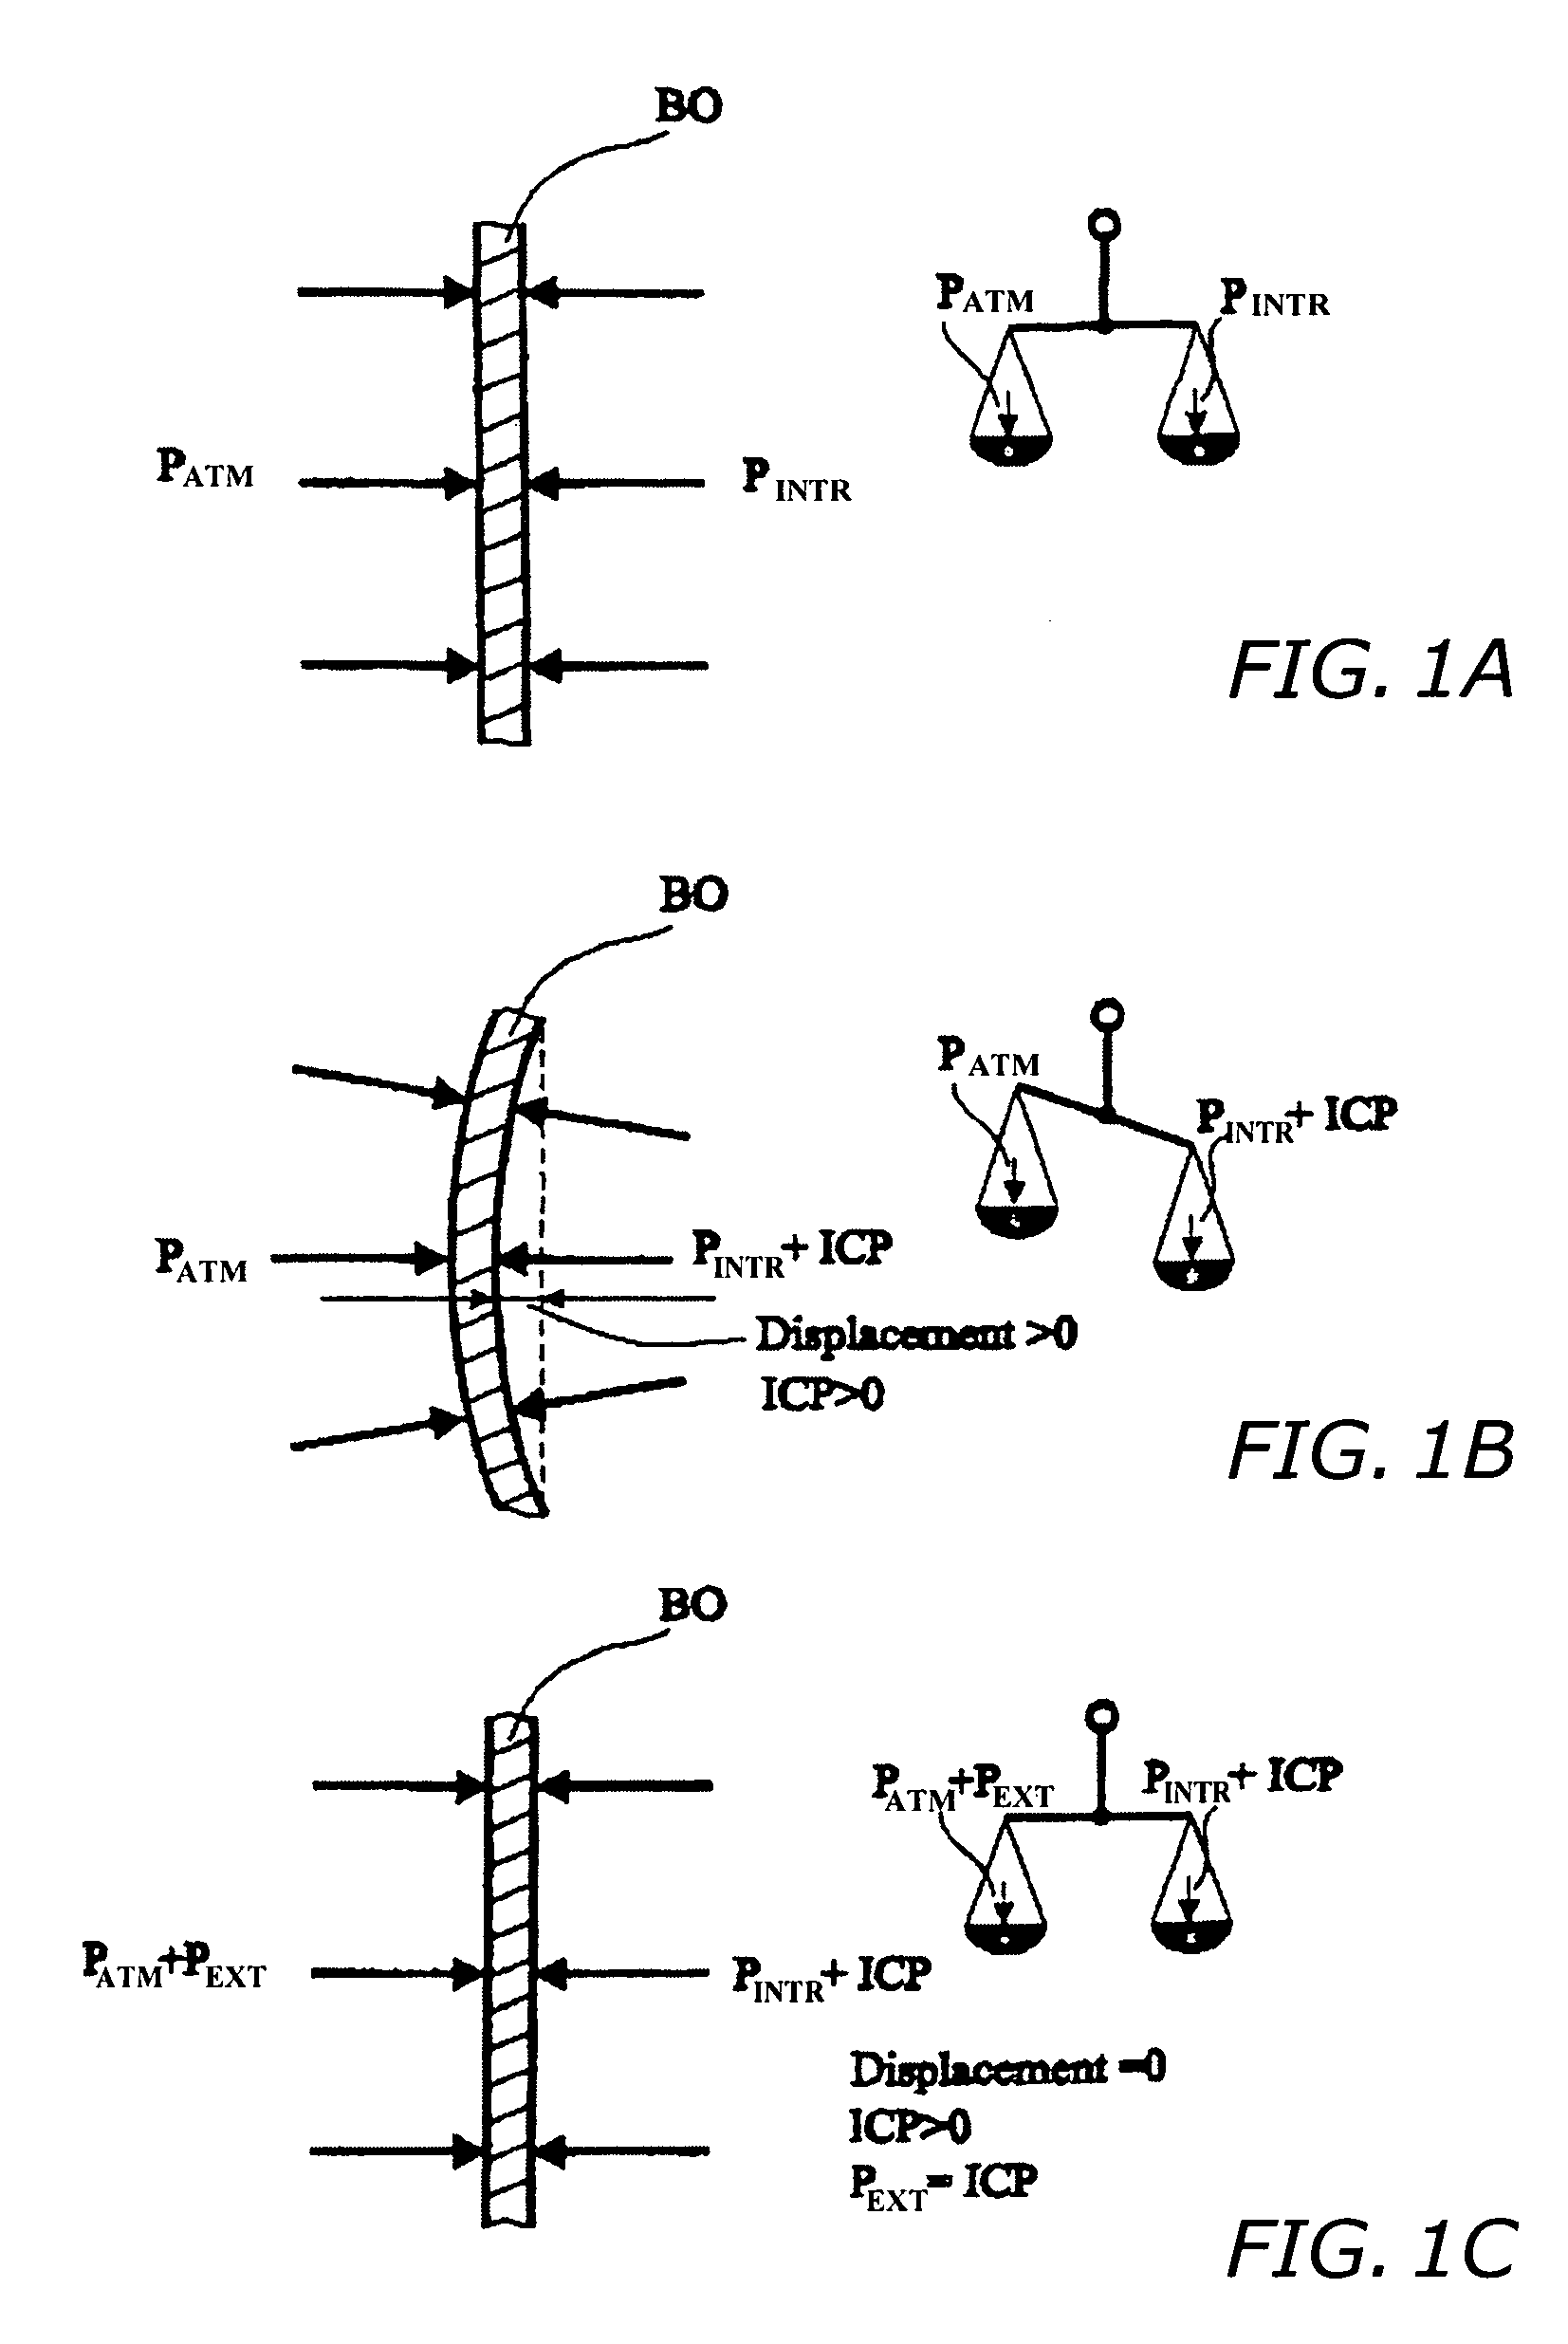 Method and apparatus for noninvasive determination of the absolute value of intracranial pressure